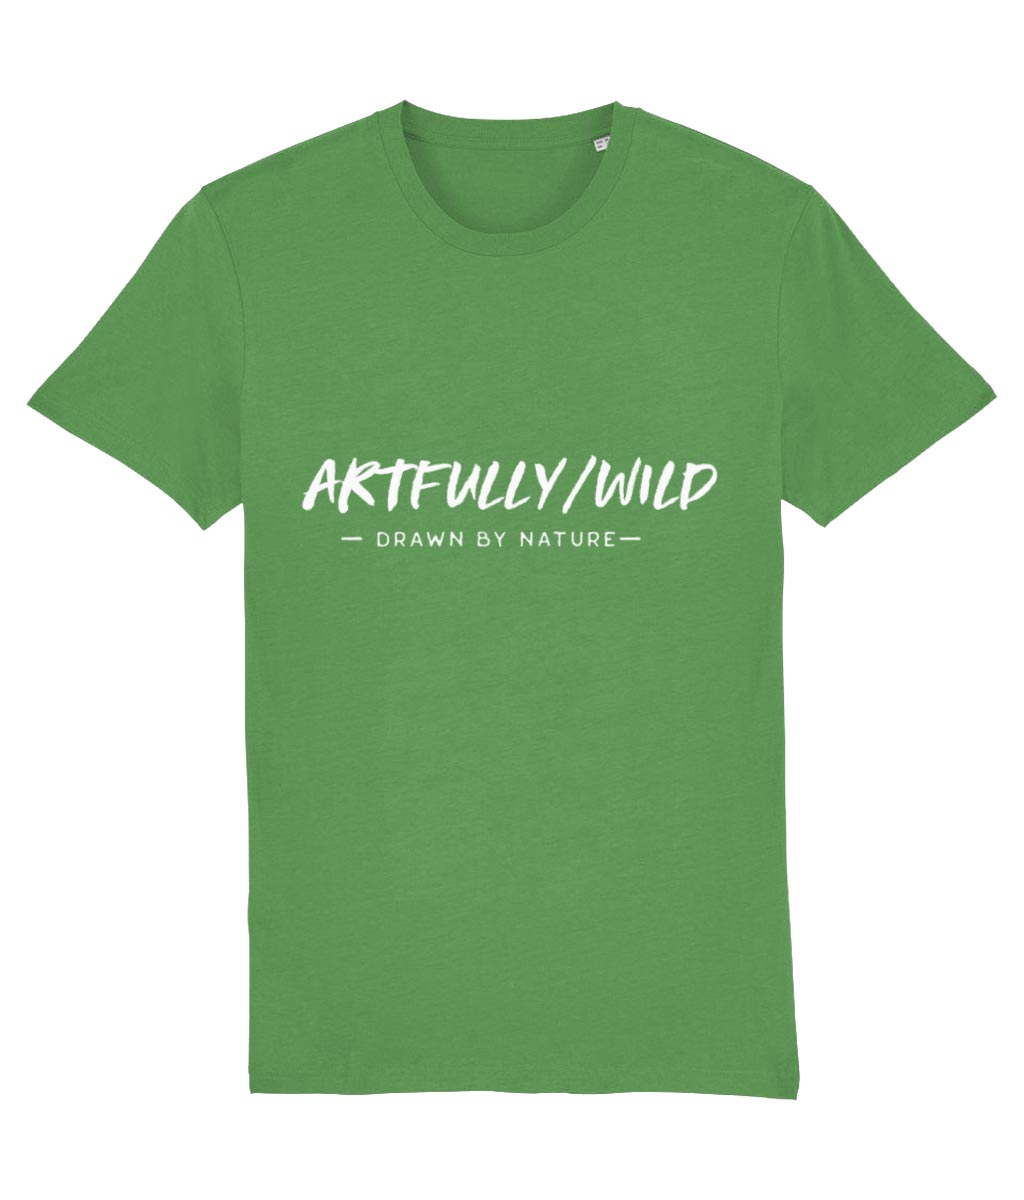 'ARTFULLY WILD. DRAWN BY NATURE' Printed Organic Cotton Bright Green T-Shirt. Unisex/Men/Women. Eco-friendly water-based Inks. Sustainable Clothing by Artfully/Wild.